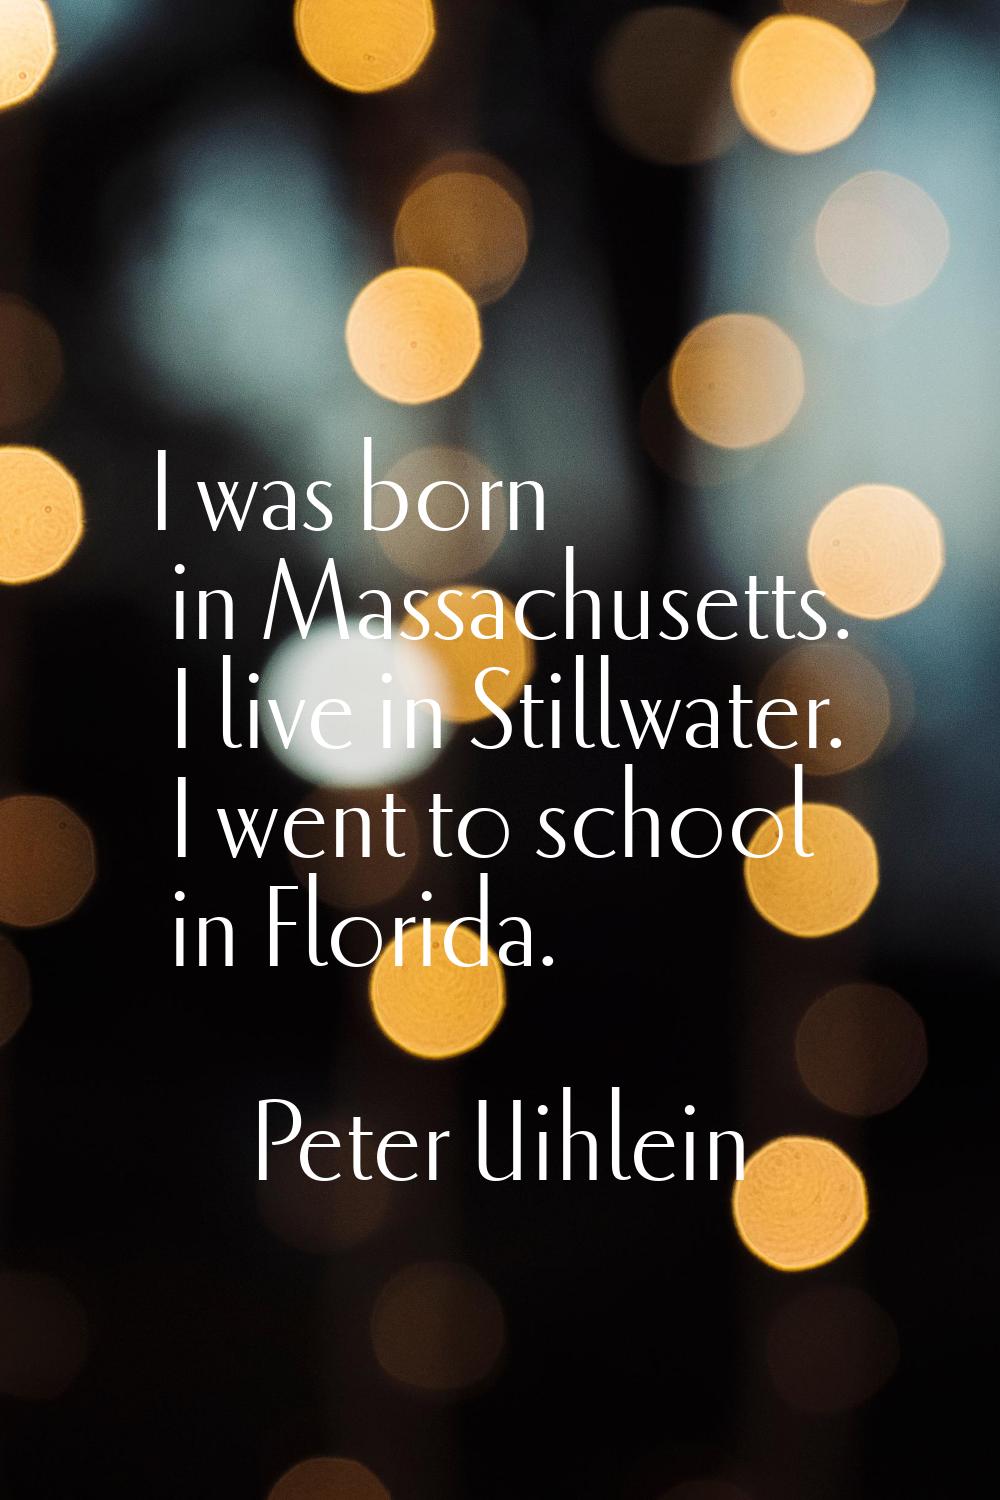 I was born in Massachusetts. I live in Stillwater. I went to school in Florida.